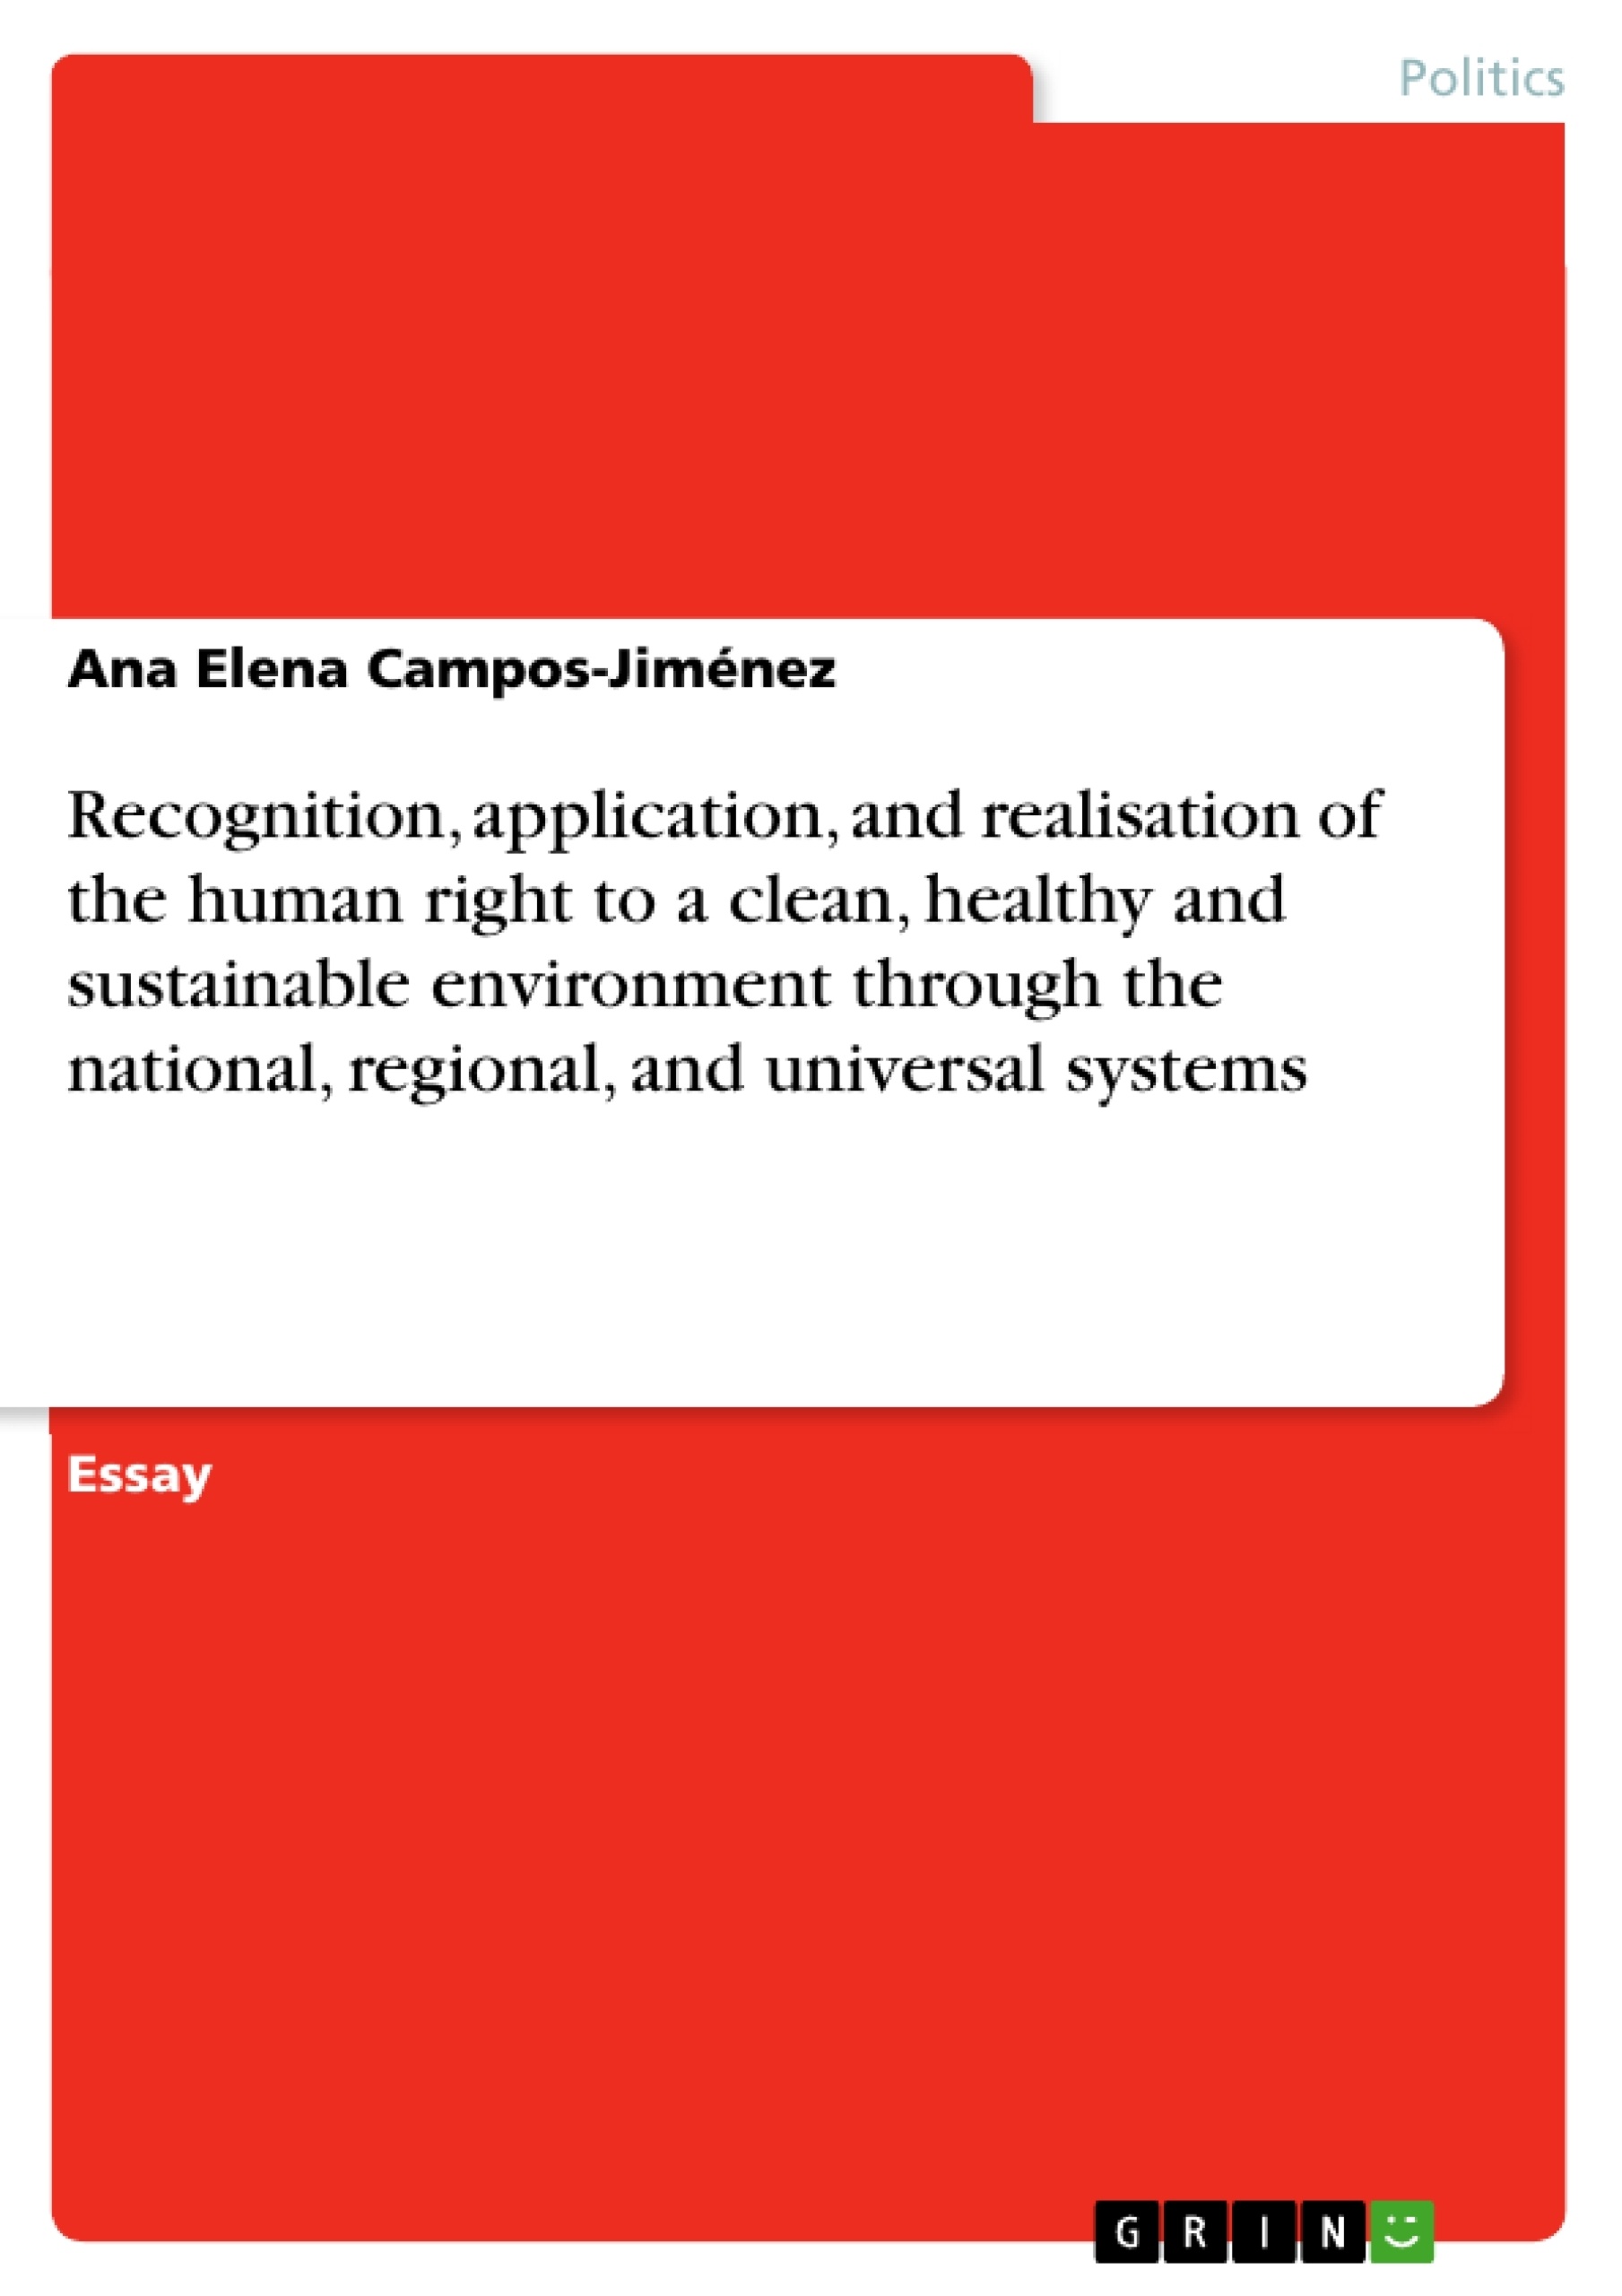 Title: Recognition, application, and realisation of the human right to a clean, healthy and sustainable environment through the national, regional, and universal systems